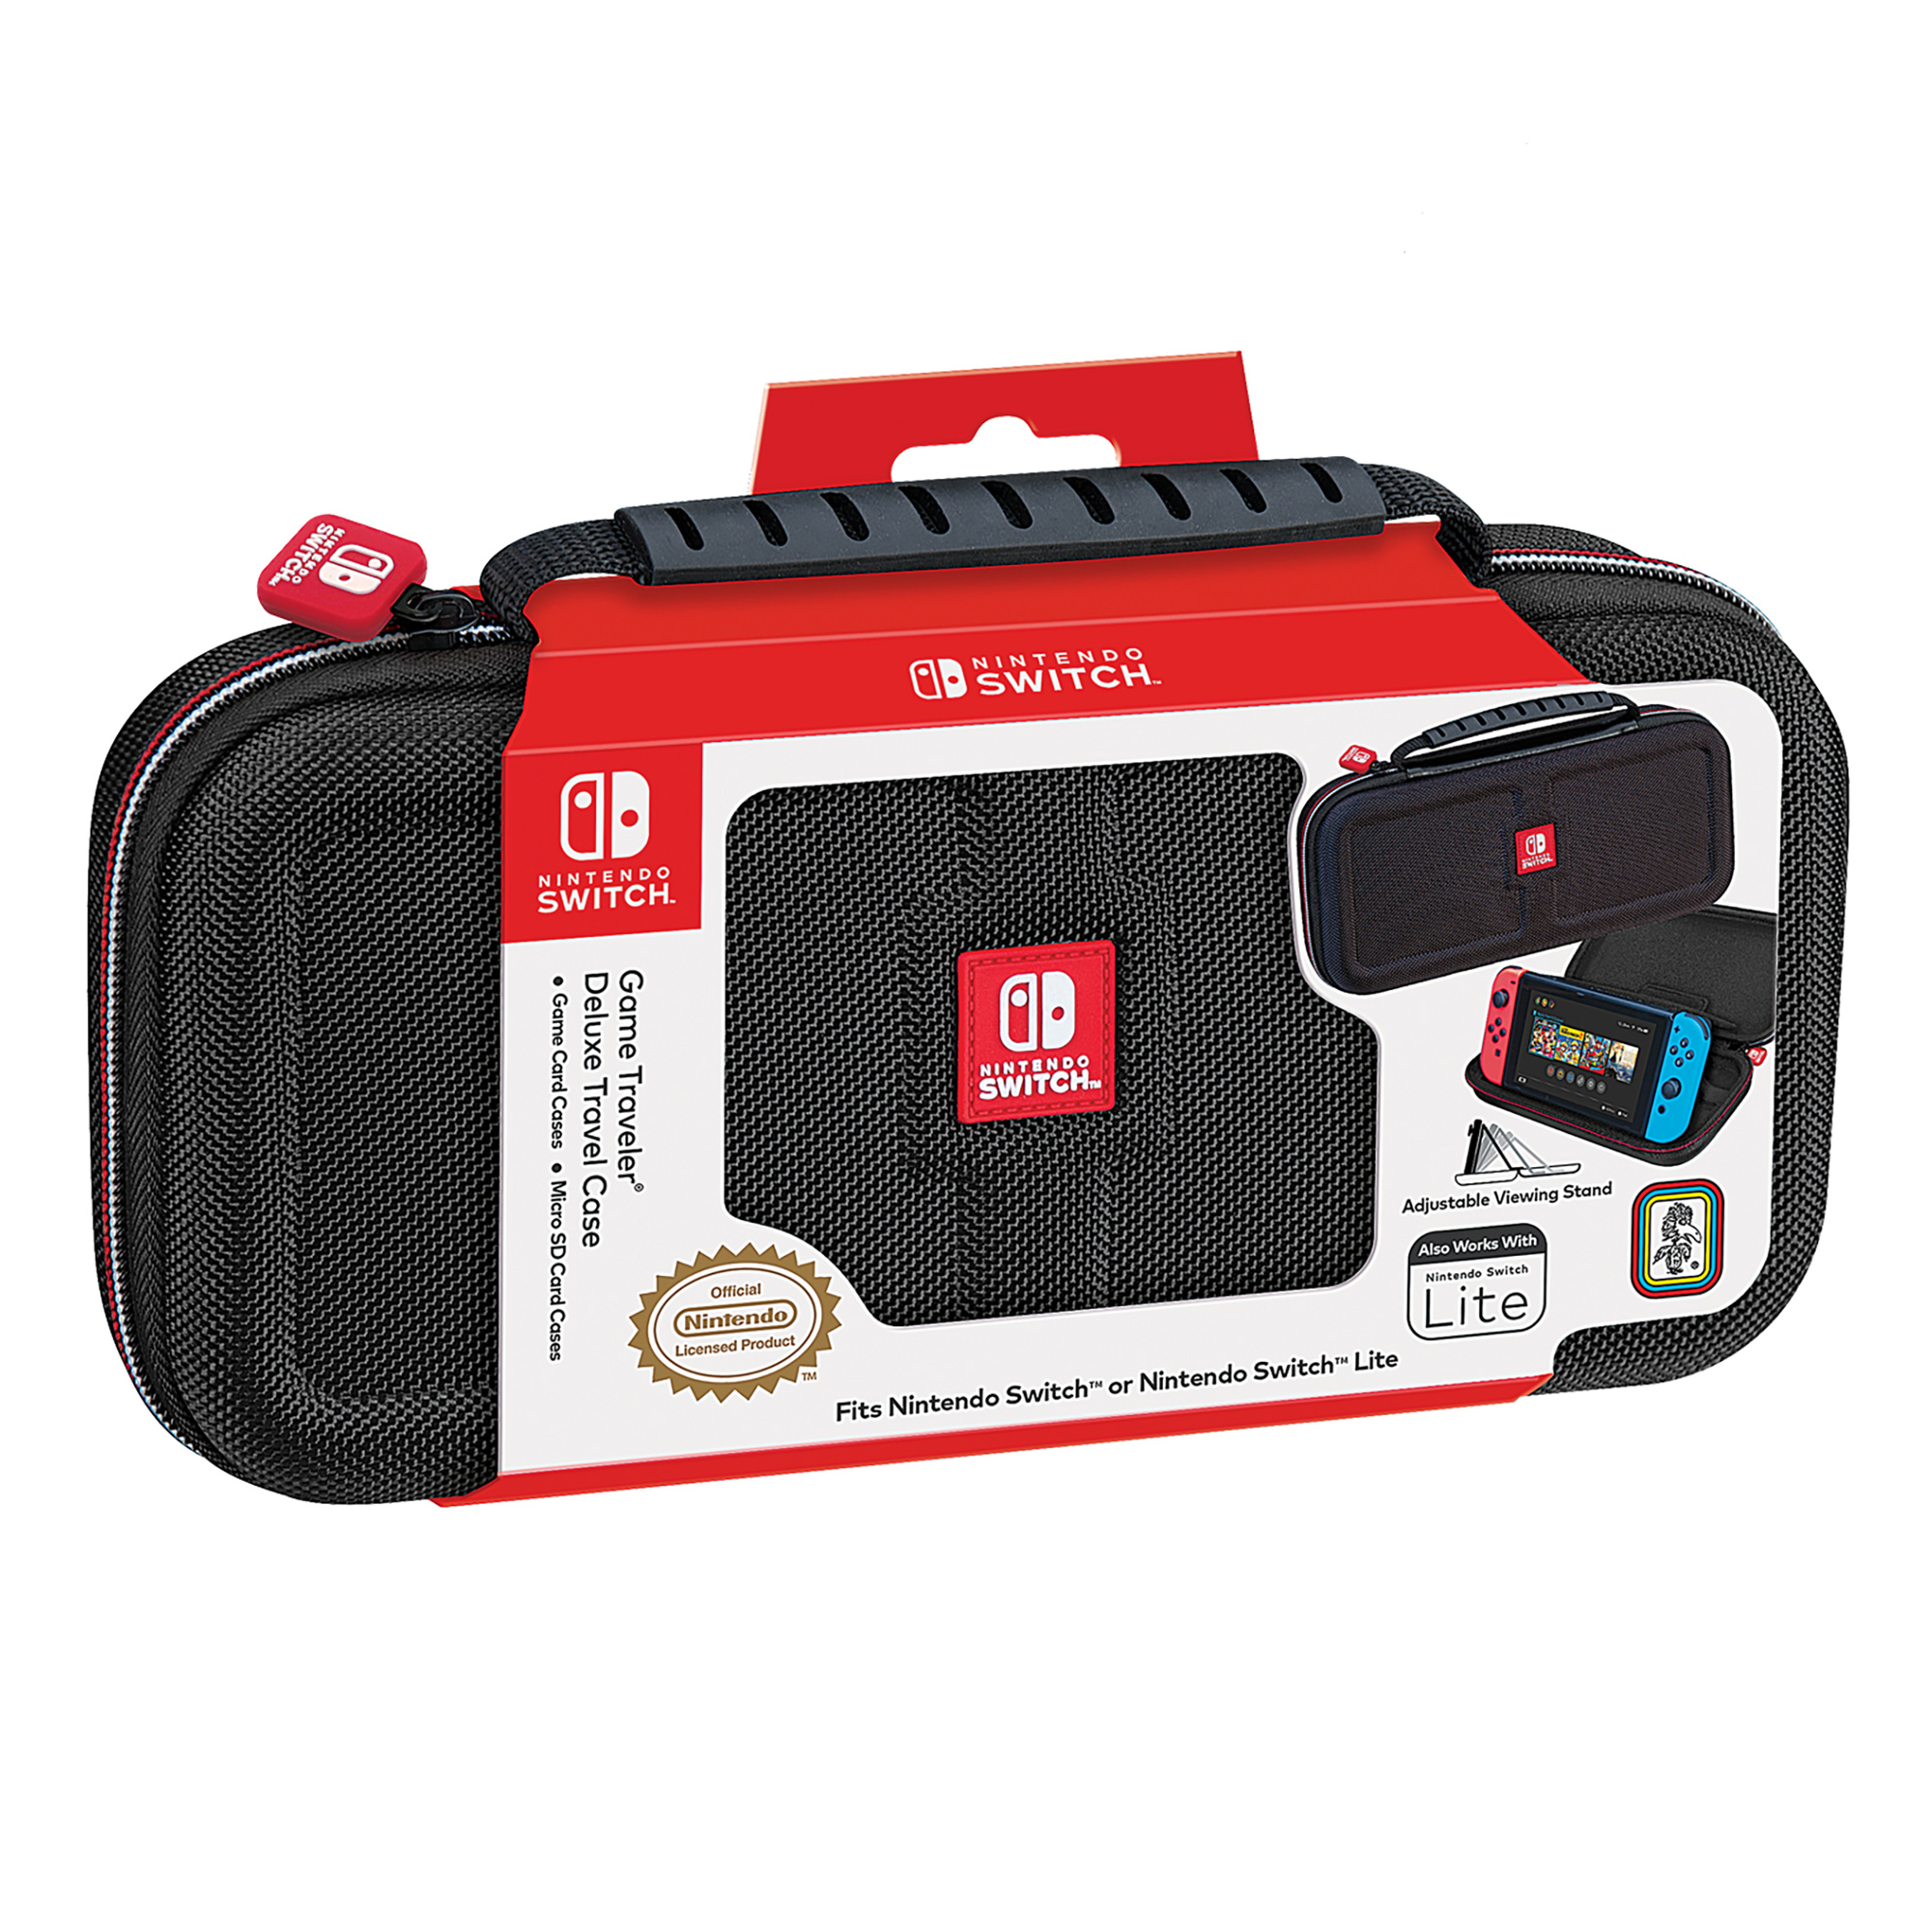 RDS Industries - Nintendo Switch and Nintendo Switch Lite, Black Video Game Traveler Deluxe, Video Game Travel Carrying Case - image 1 of 9